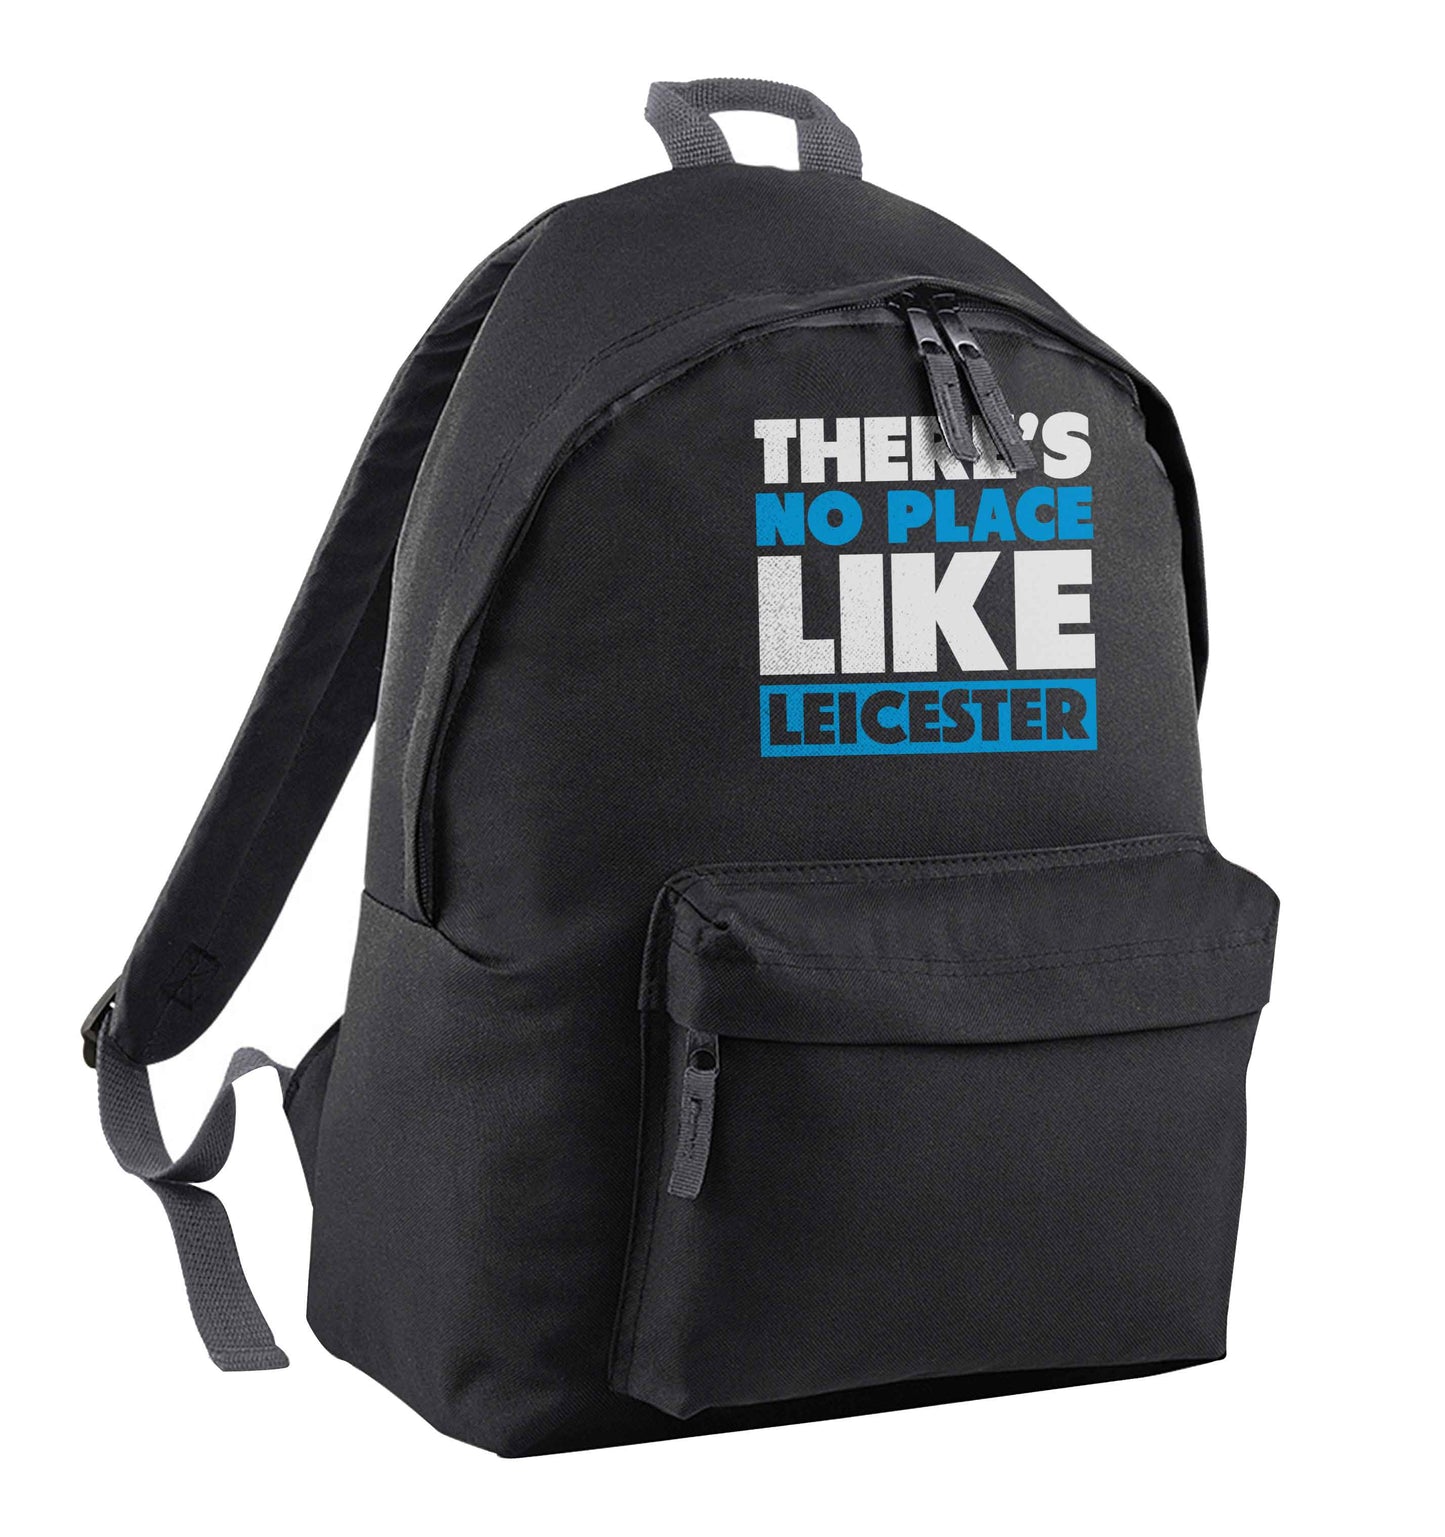 There's no place like Leicester black adults backpack